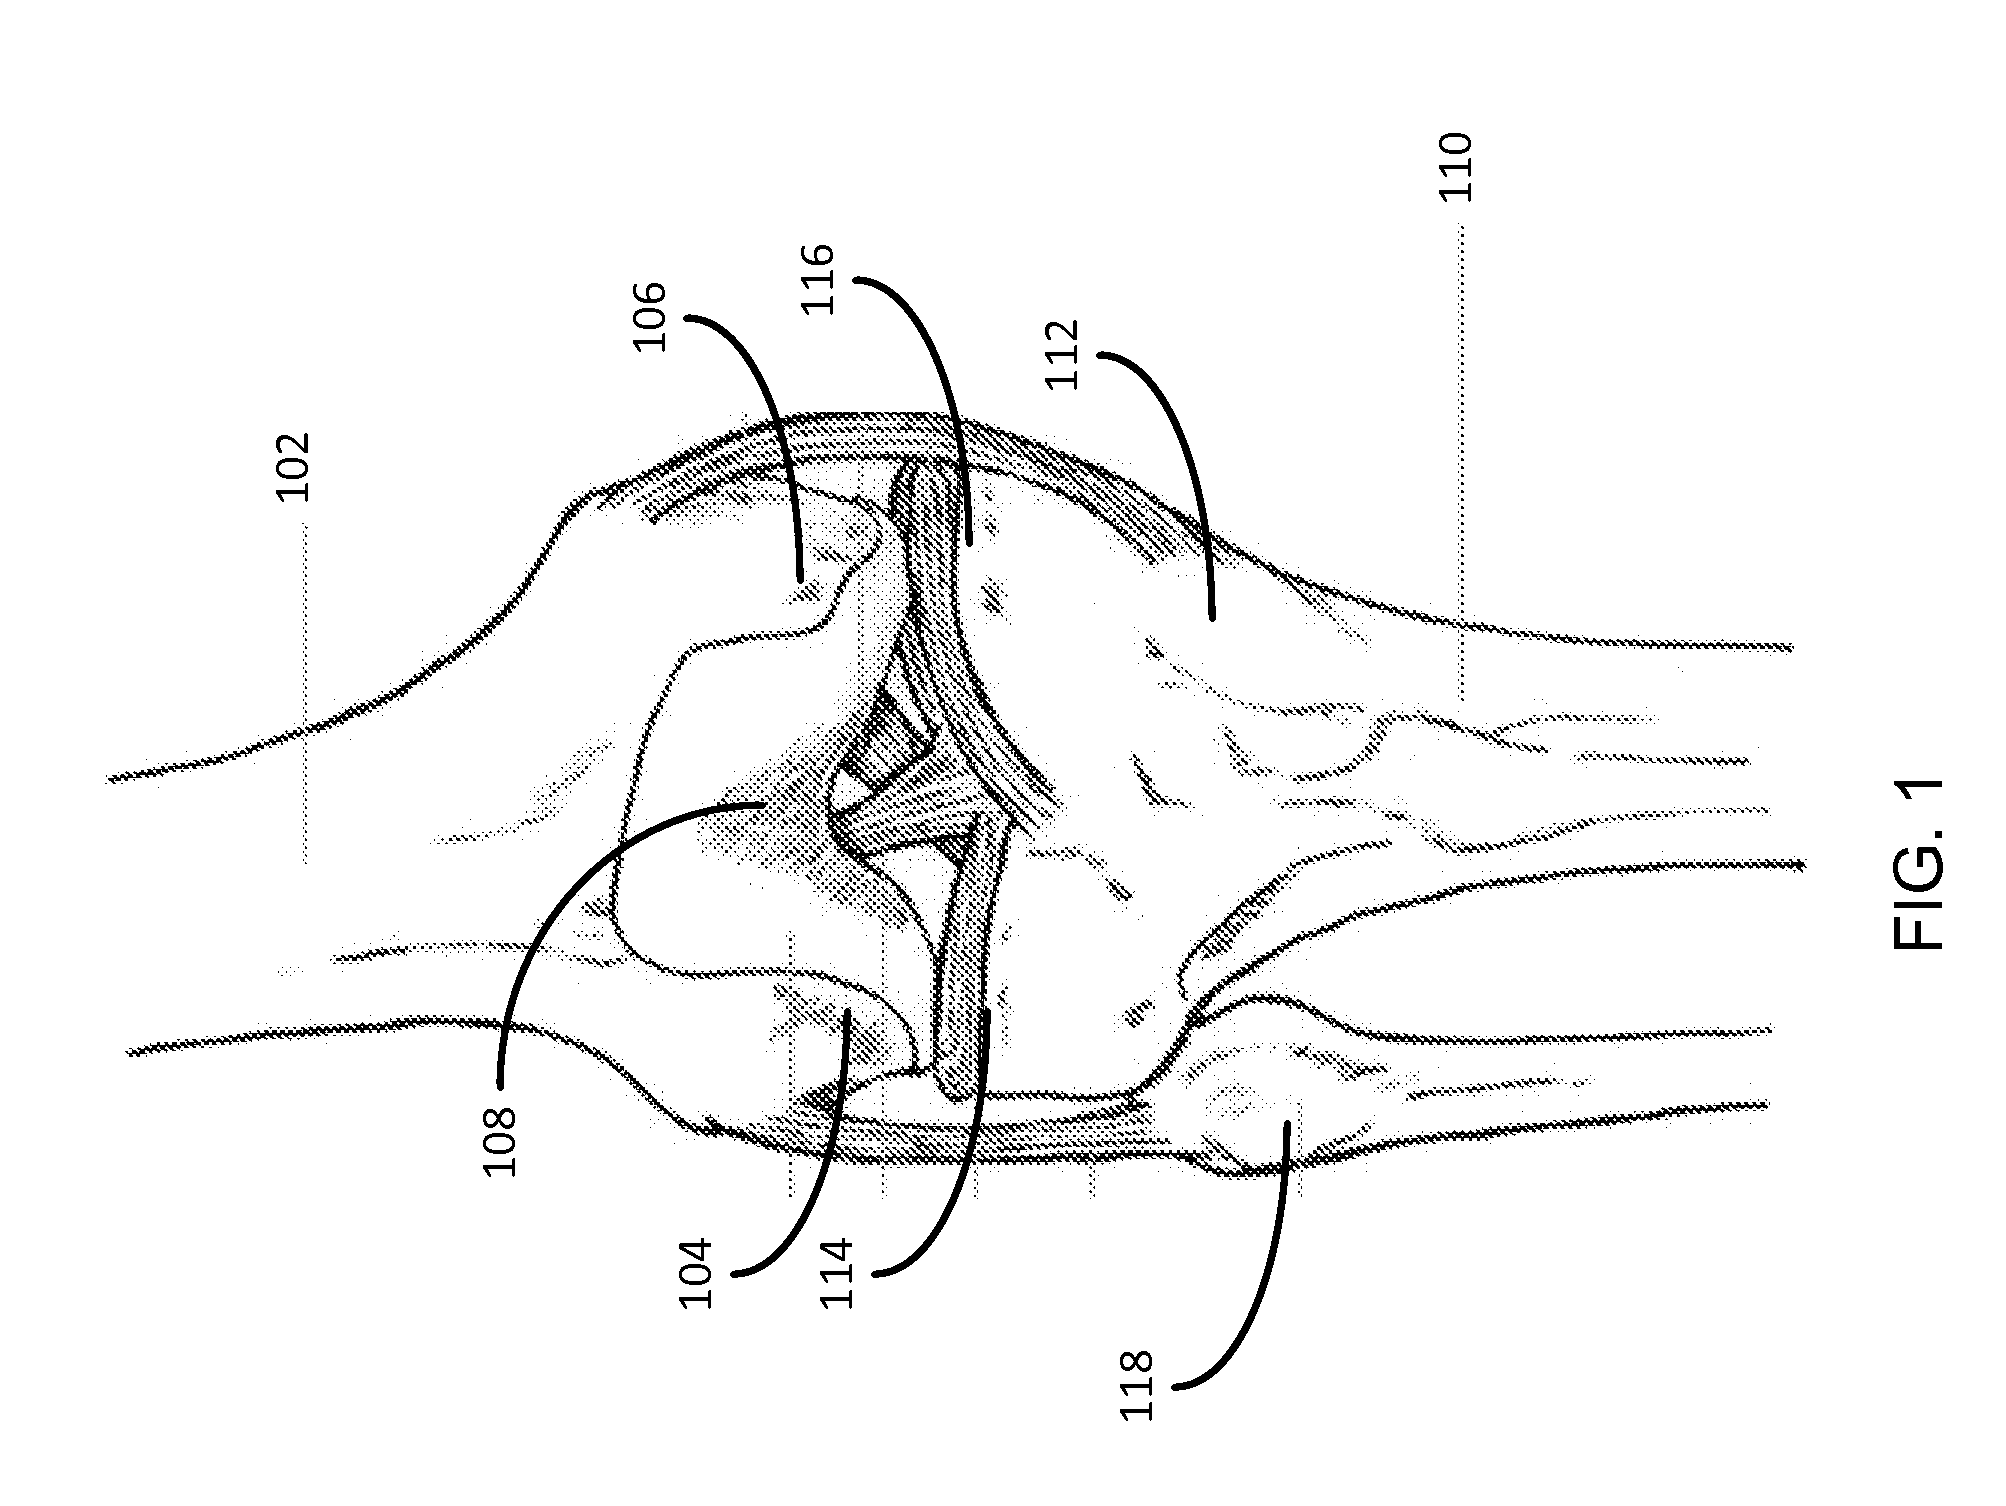 Method for knee resection alignment approximation in knee replacement procedures